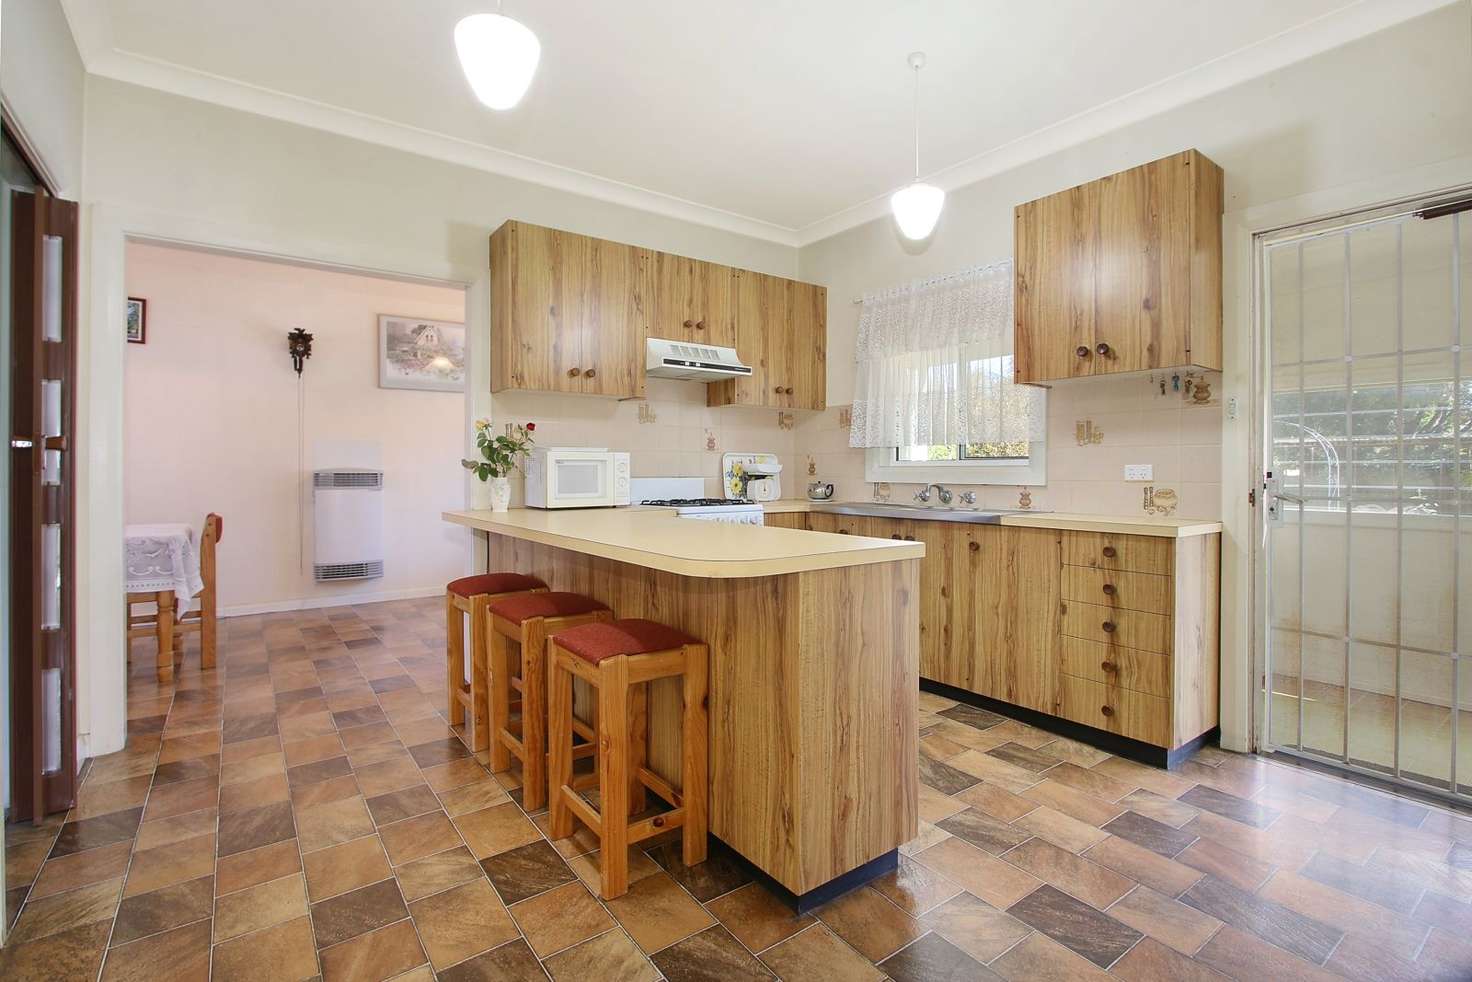 Main view of Homely house listing, 407 Parnall Street, Lavington NSW 2641